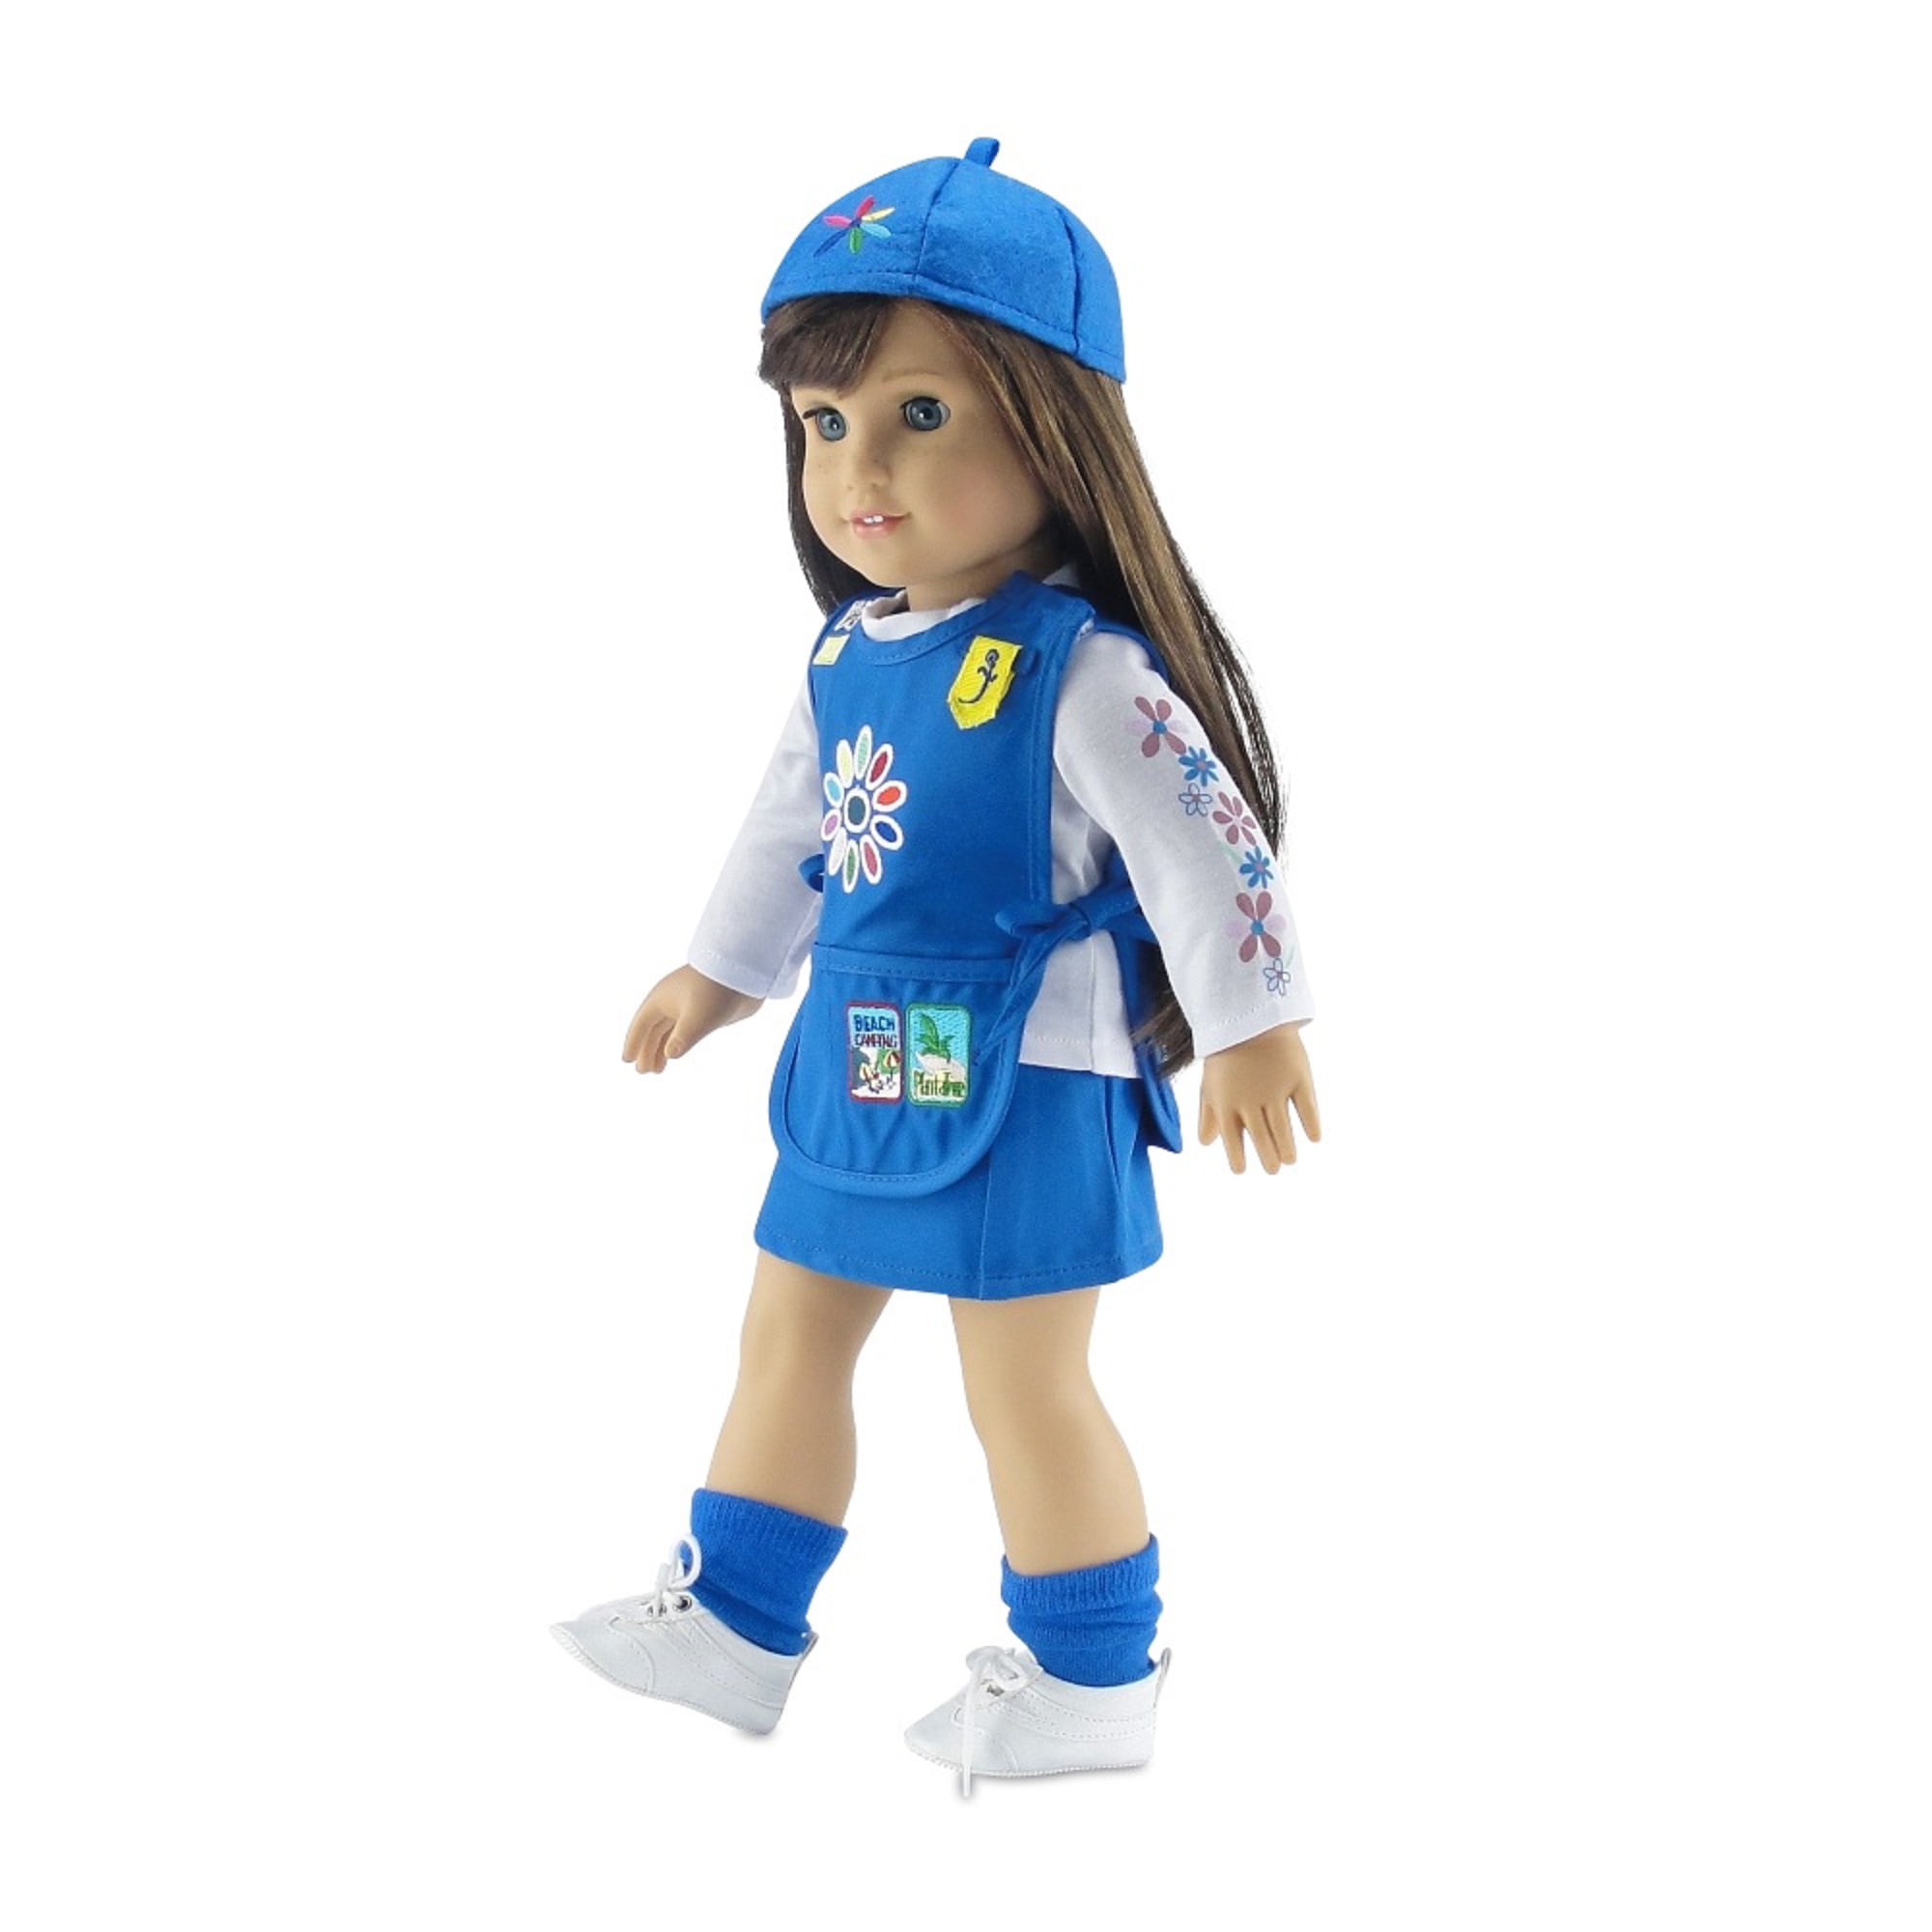 Debs BROWNIE Scout Uniform Skirt Blouse Cap Doll Clothes For 18" American Girl 